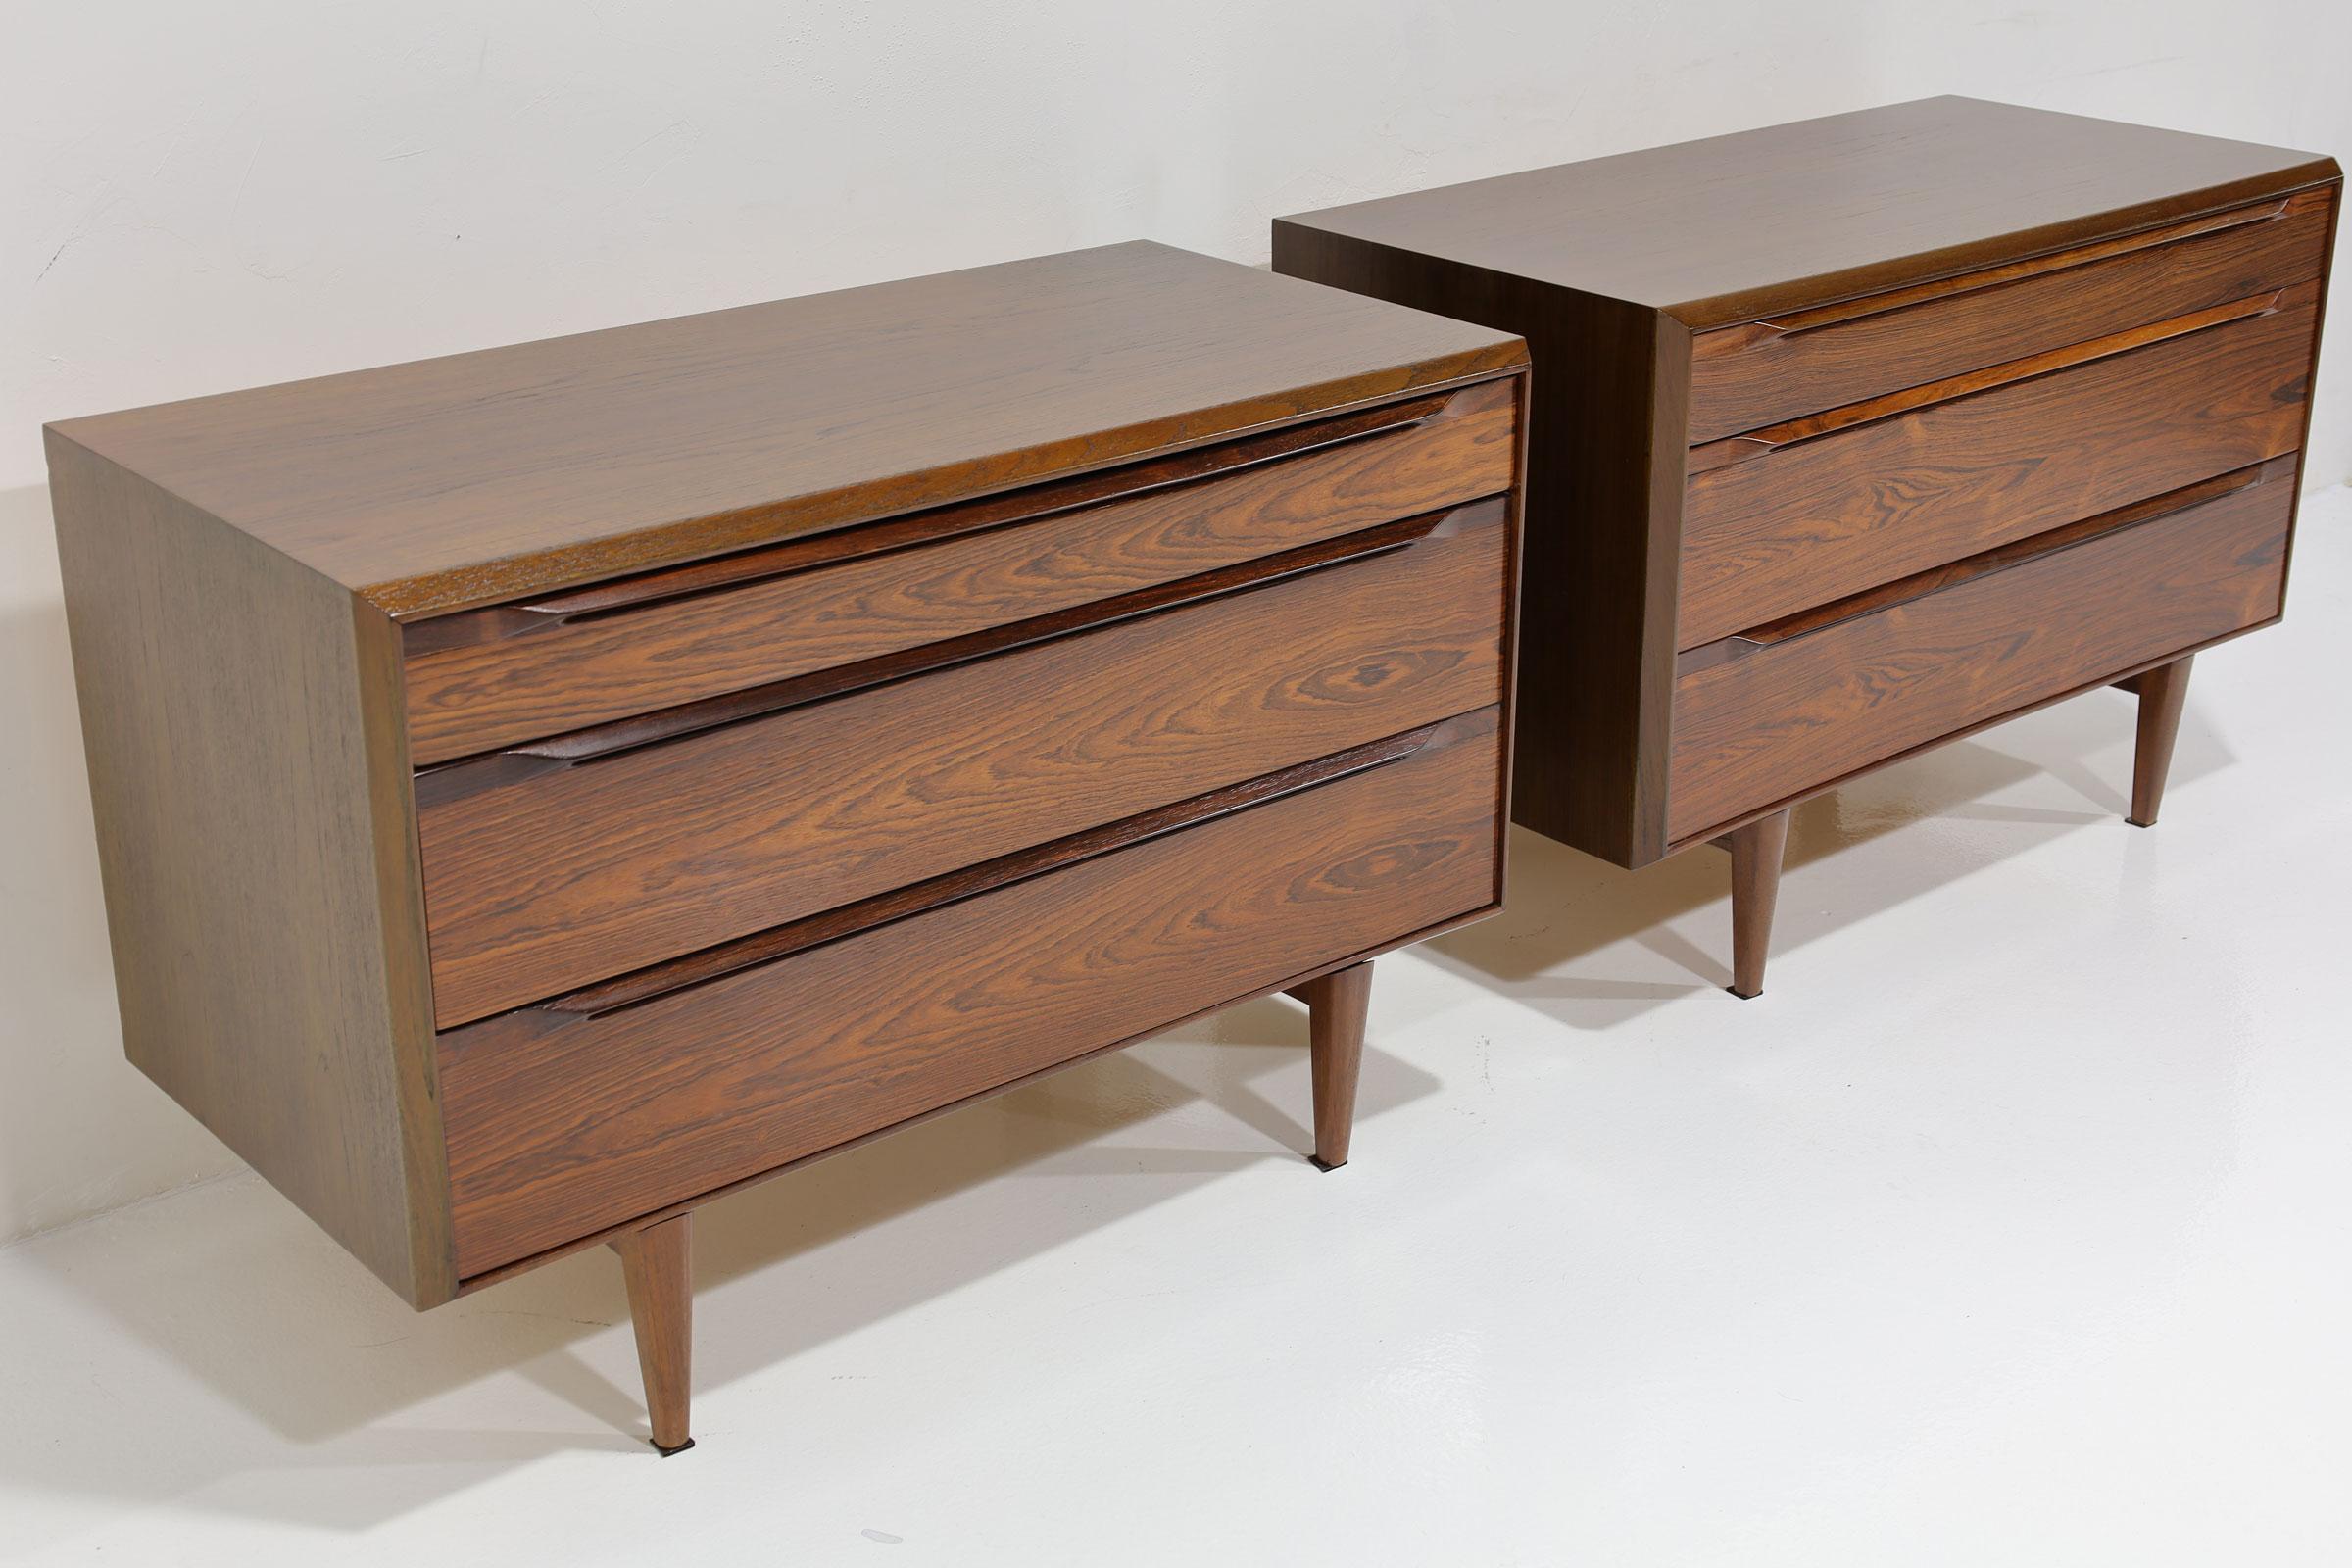 Beautiful pair of rosewood and teak chest fully restored. Great for banking a fireplace, entrance or as nightstands. 